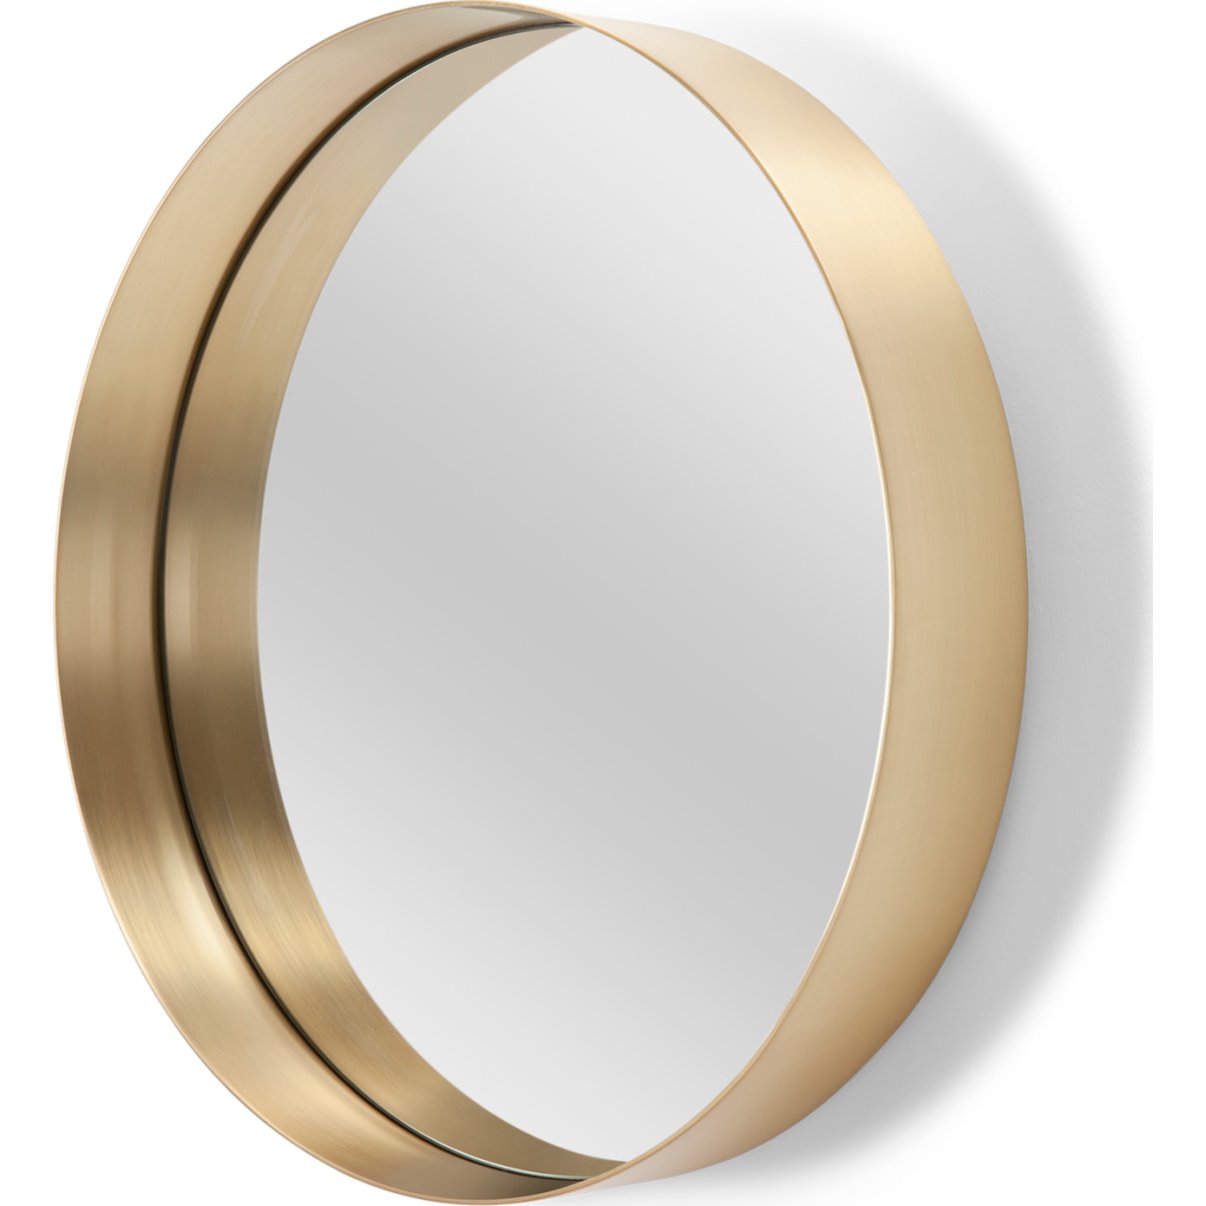 Alana Round Wall Mirror Extra Large 80 cm, Brushed Brass